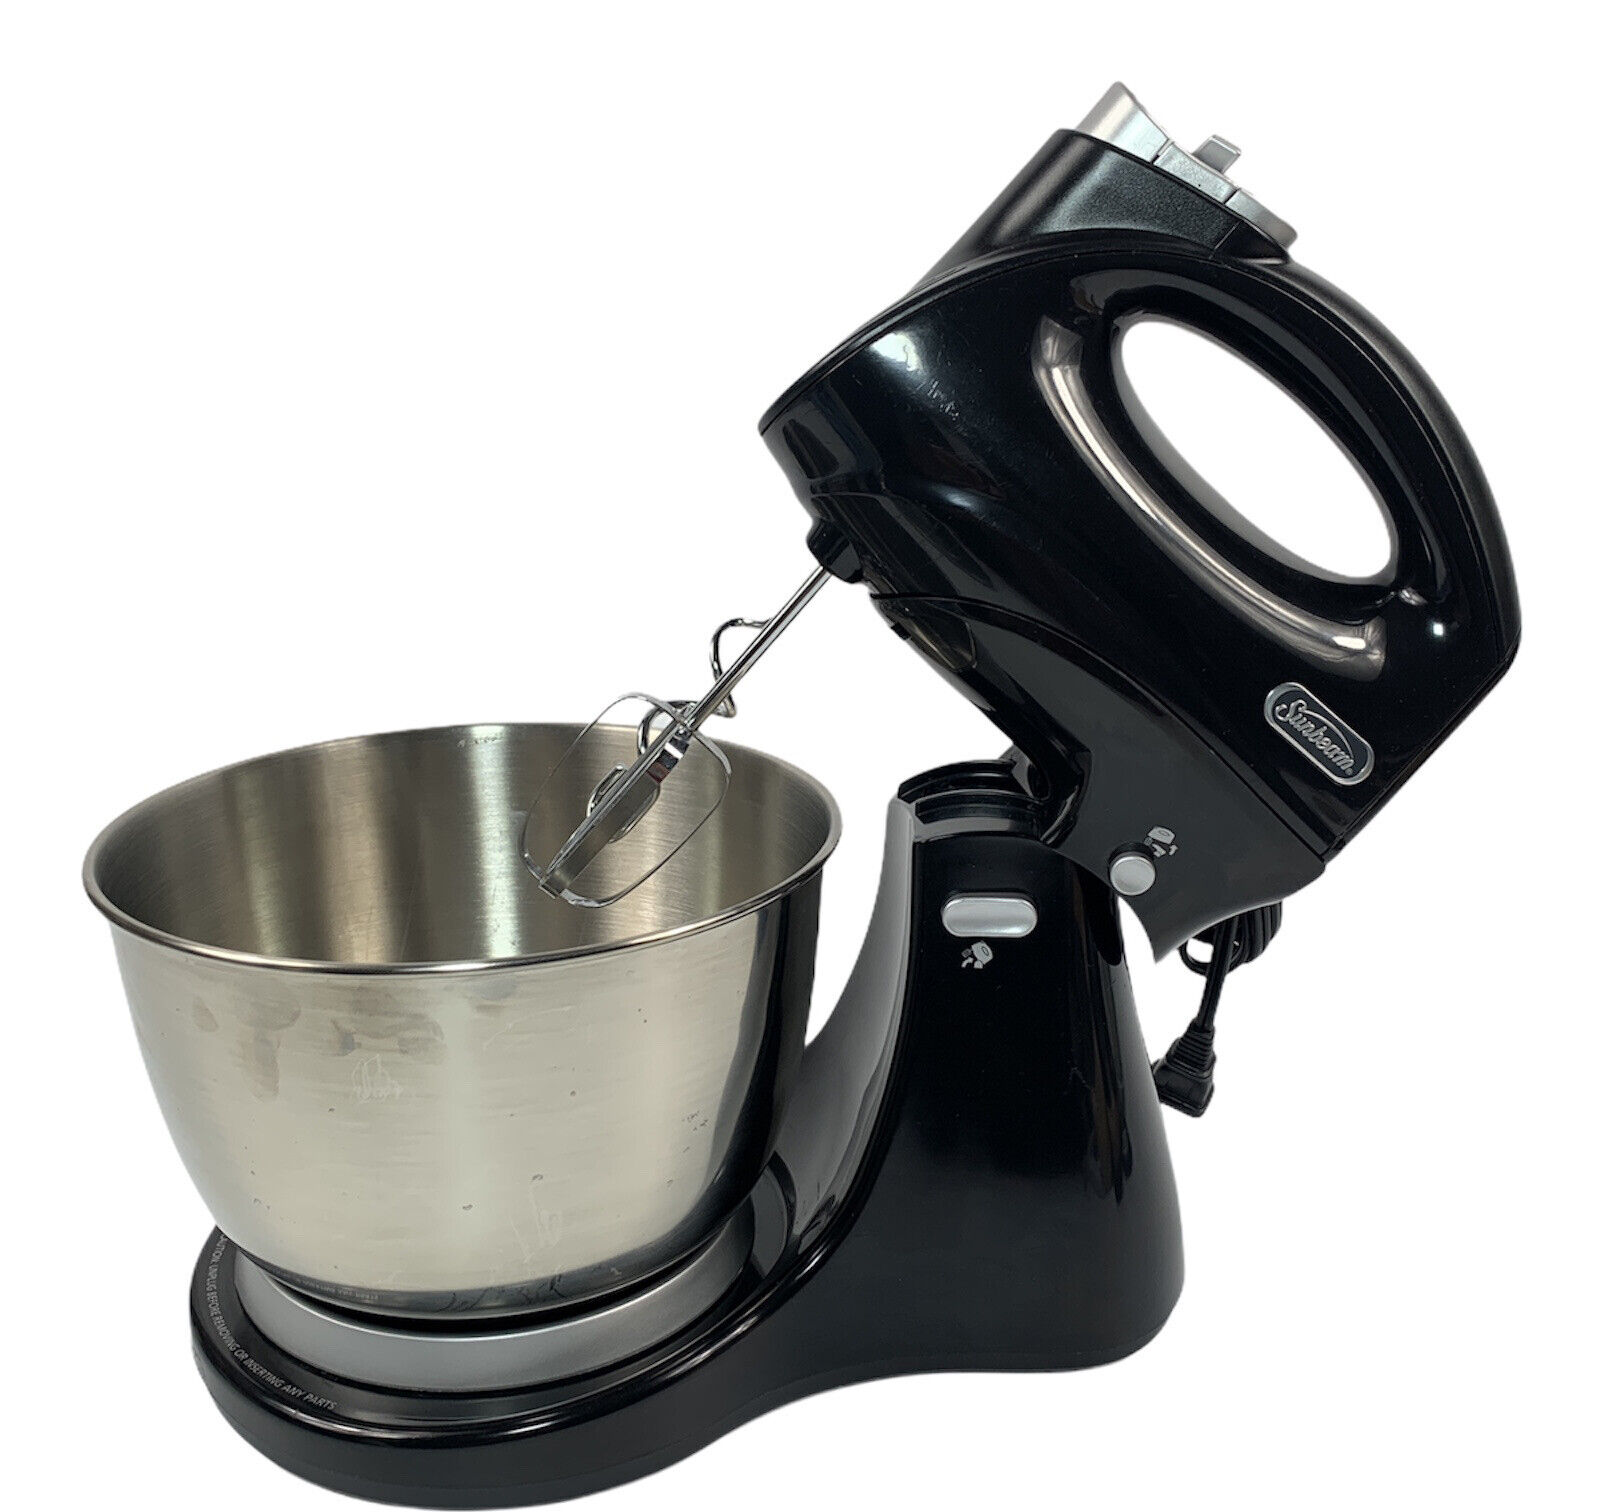 Outlet SALE Sunbeam Hand Stand shipfree Mixer Black Model:FPSBHS0302 TESTED WORK GREA